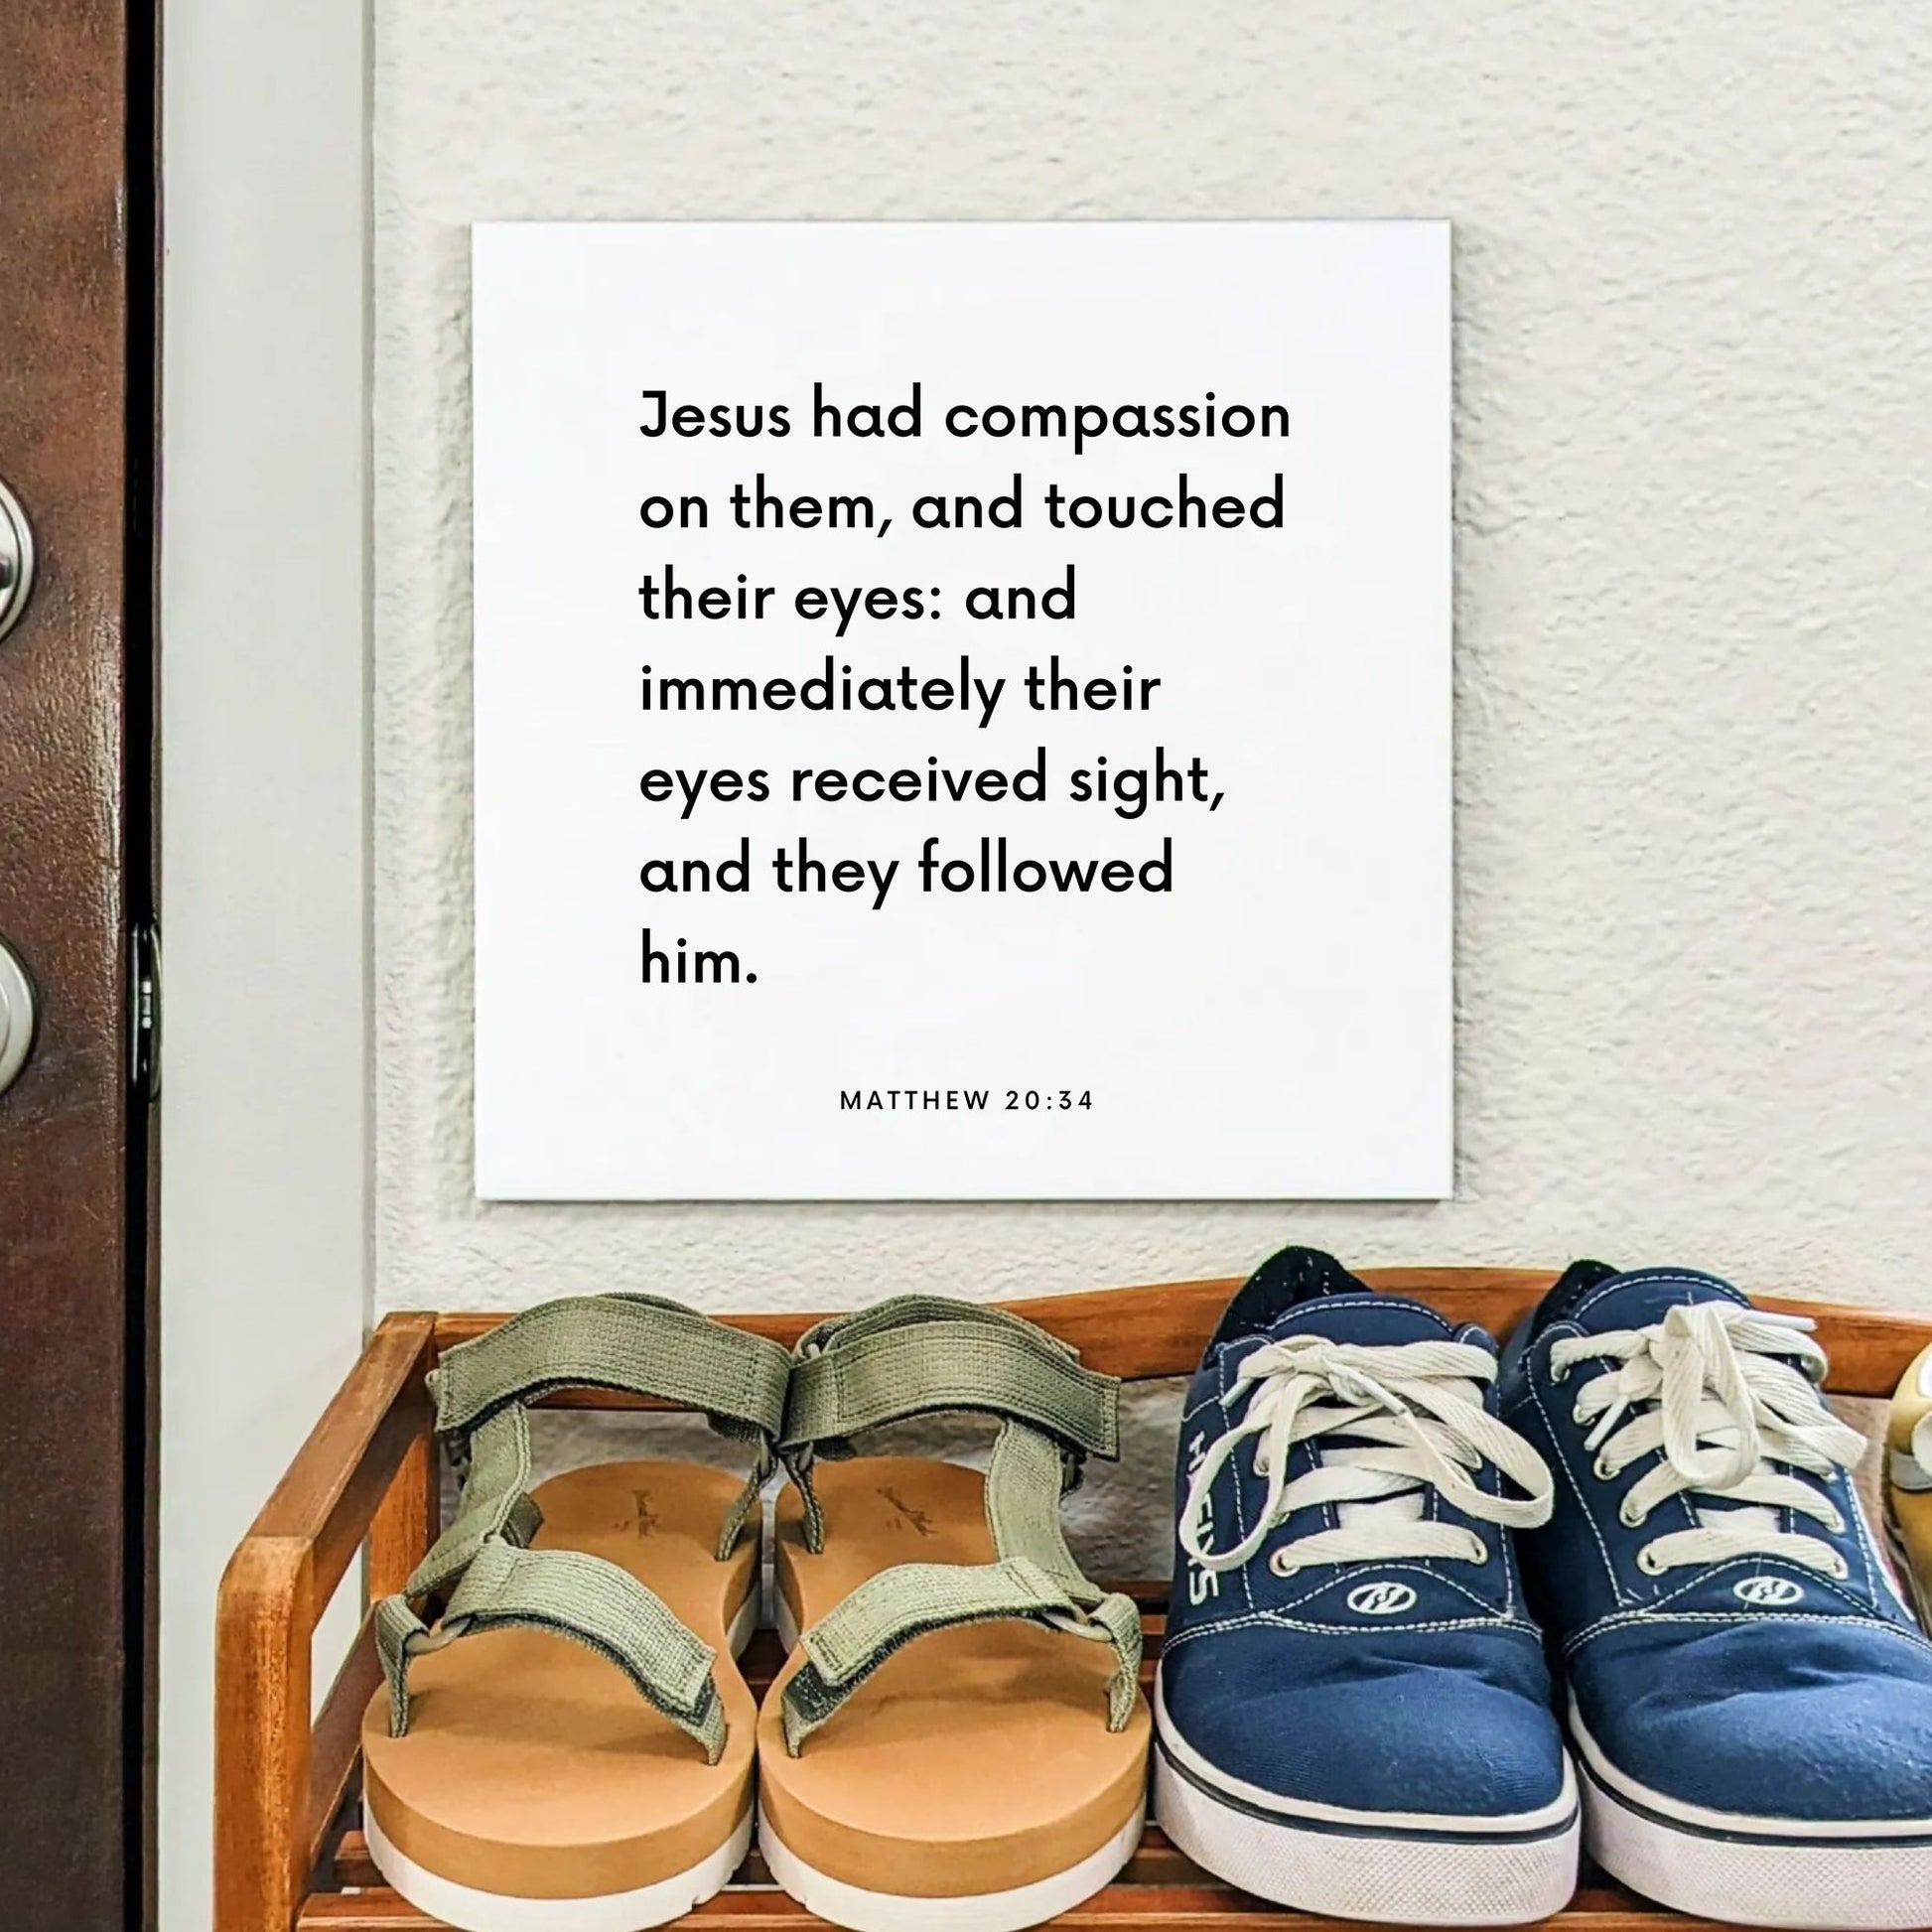 Shoes mouting of the scripture tile for Matthew 20:34 - "Jesus had compassion on them, and touched their eyes"